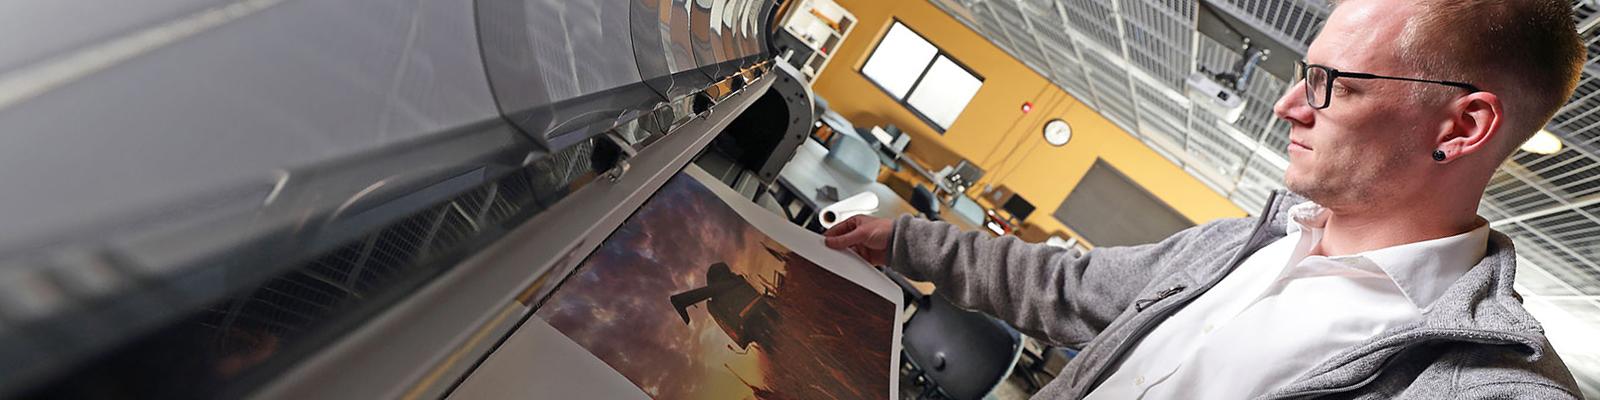 Male student examining print on large scale printer